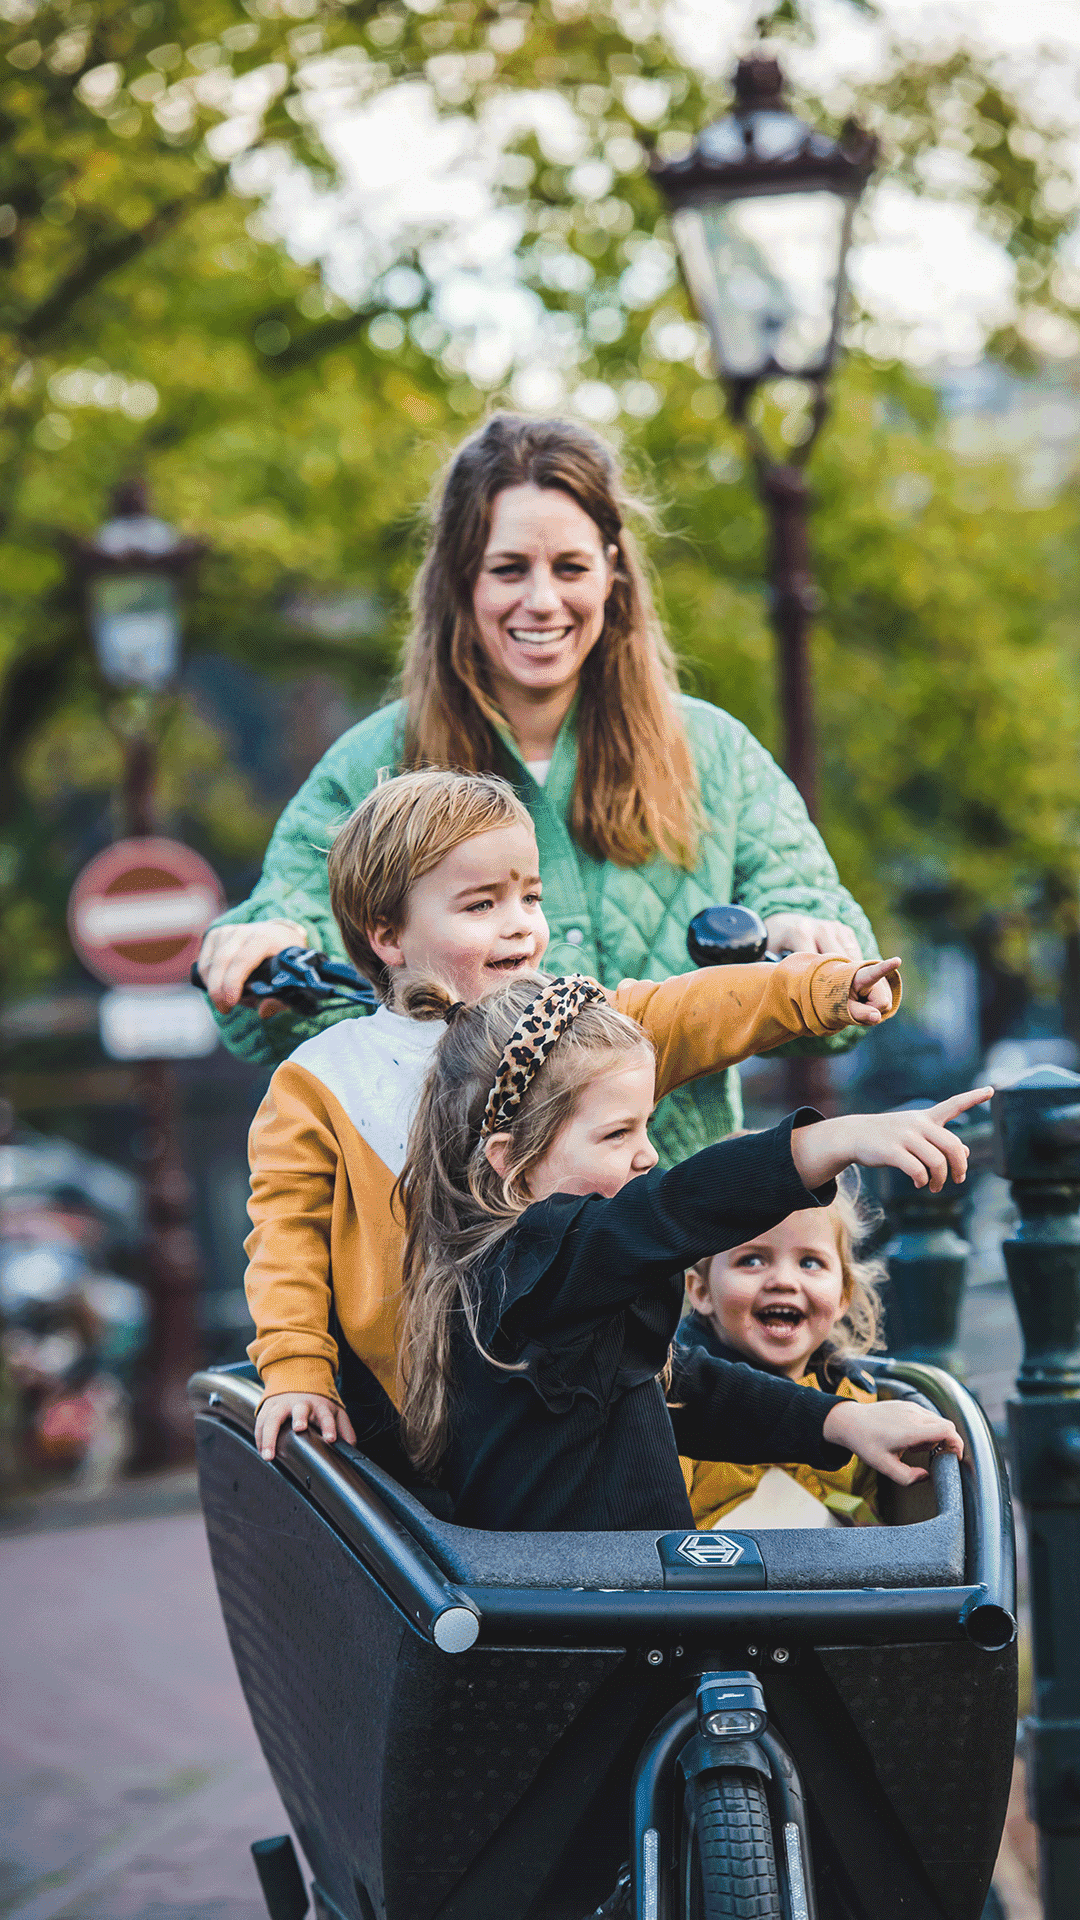 AholdDelhaize_Careers_Gall_&_Gall_Anne-Claire de Vries_Data_Analytics_biking_with_kids_frontview.png